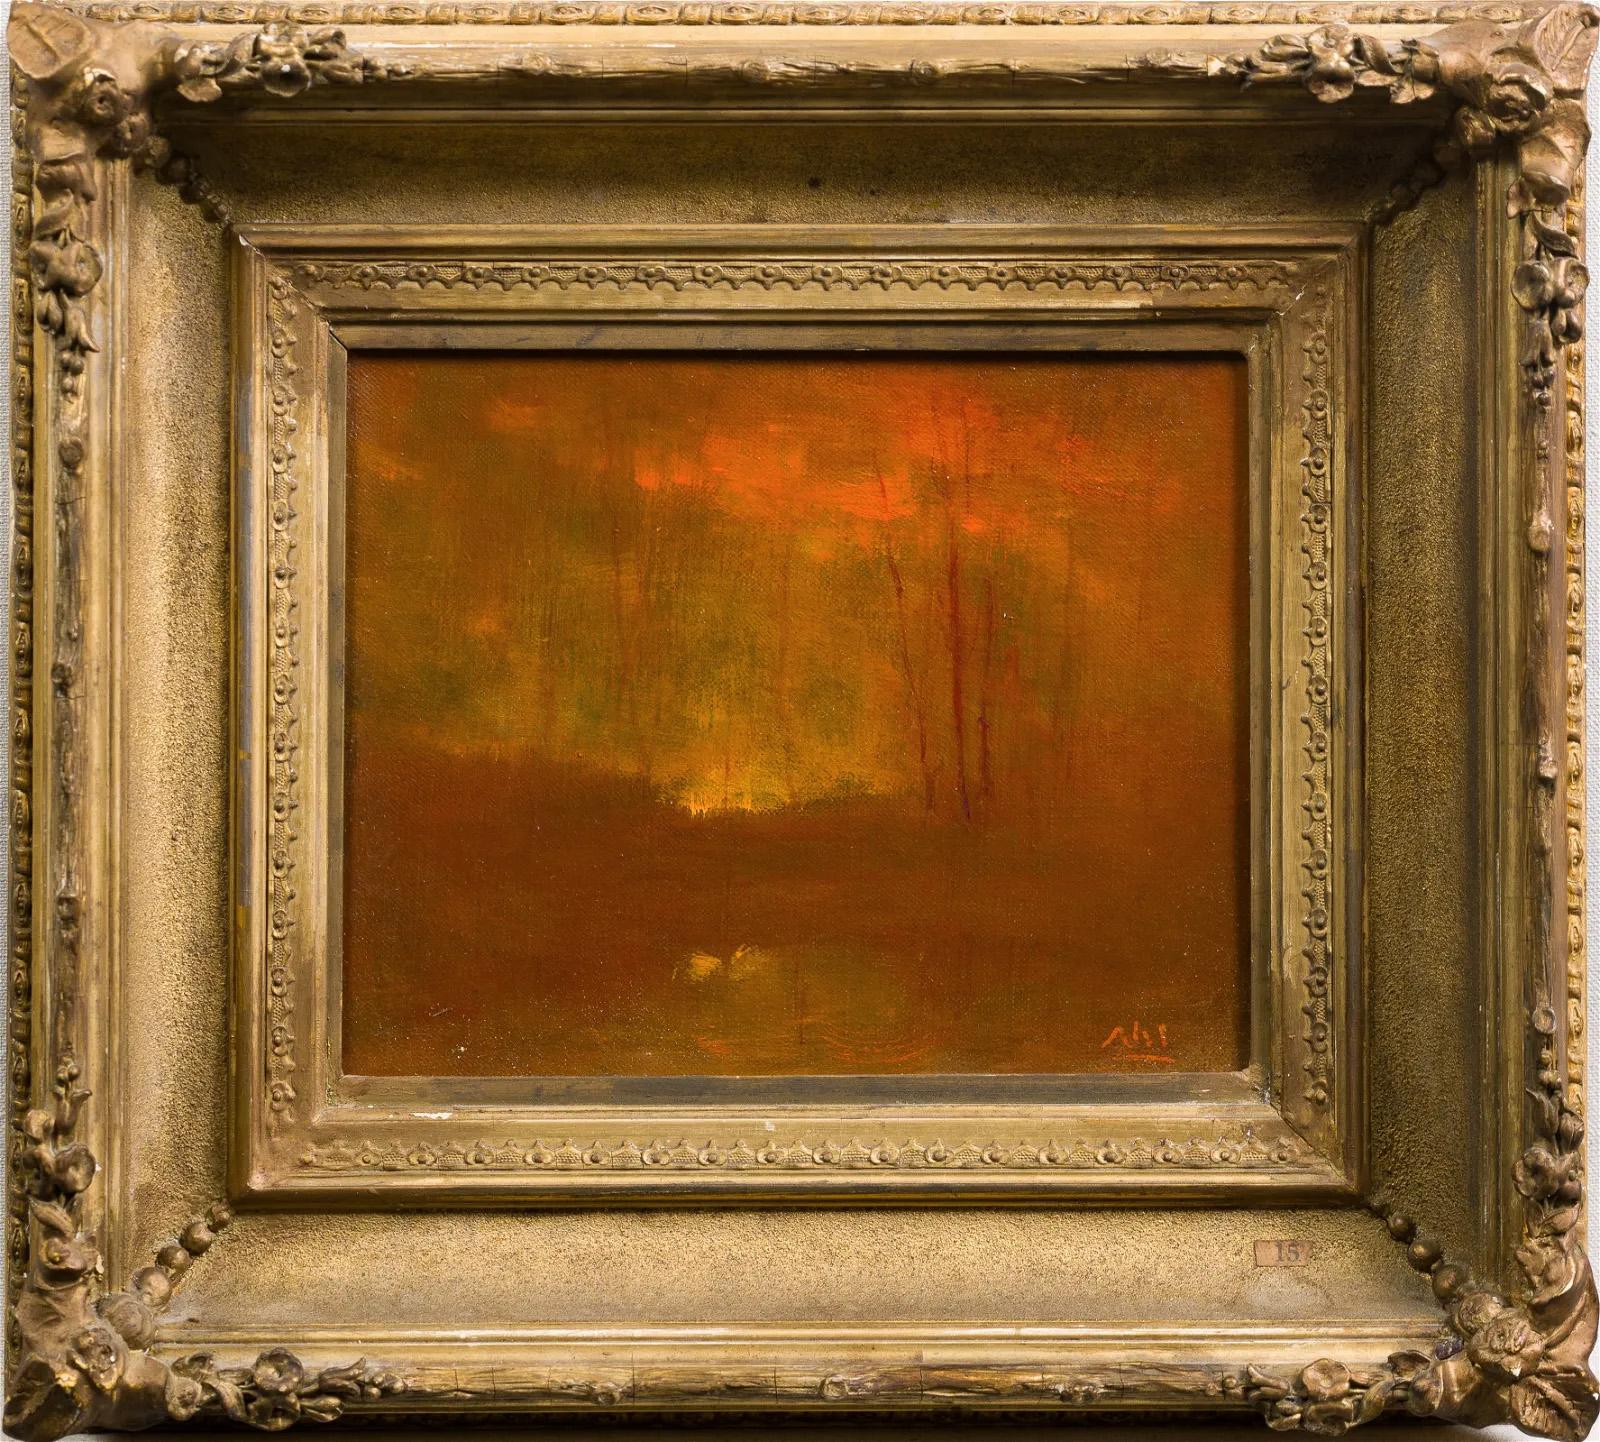 Evening Poetry Antique American Tonalist Sunset Exhibited Landscape Oil Painting - Brown Landscape Painting by Henry Hammond Ahl 